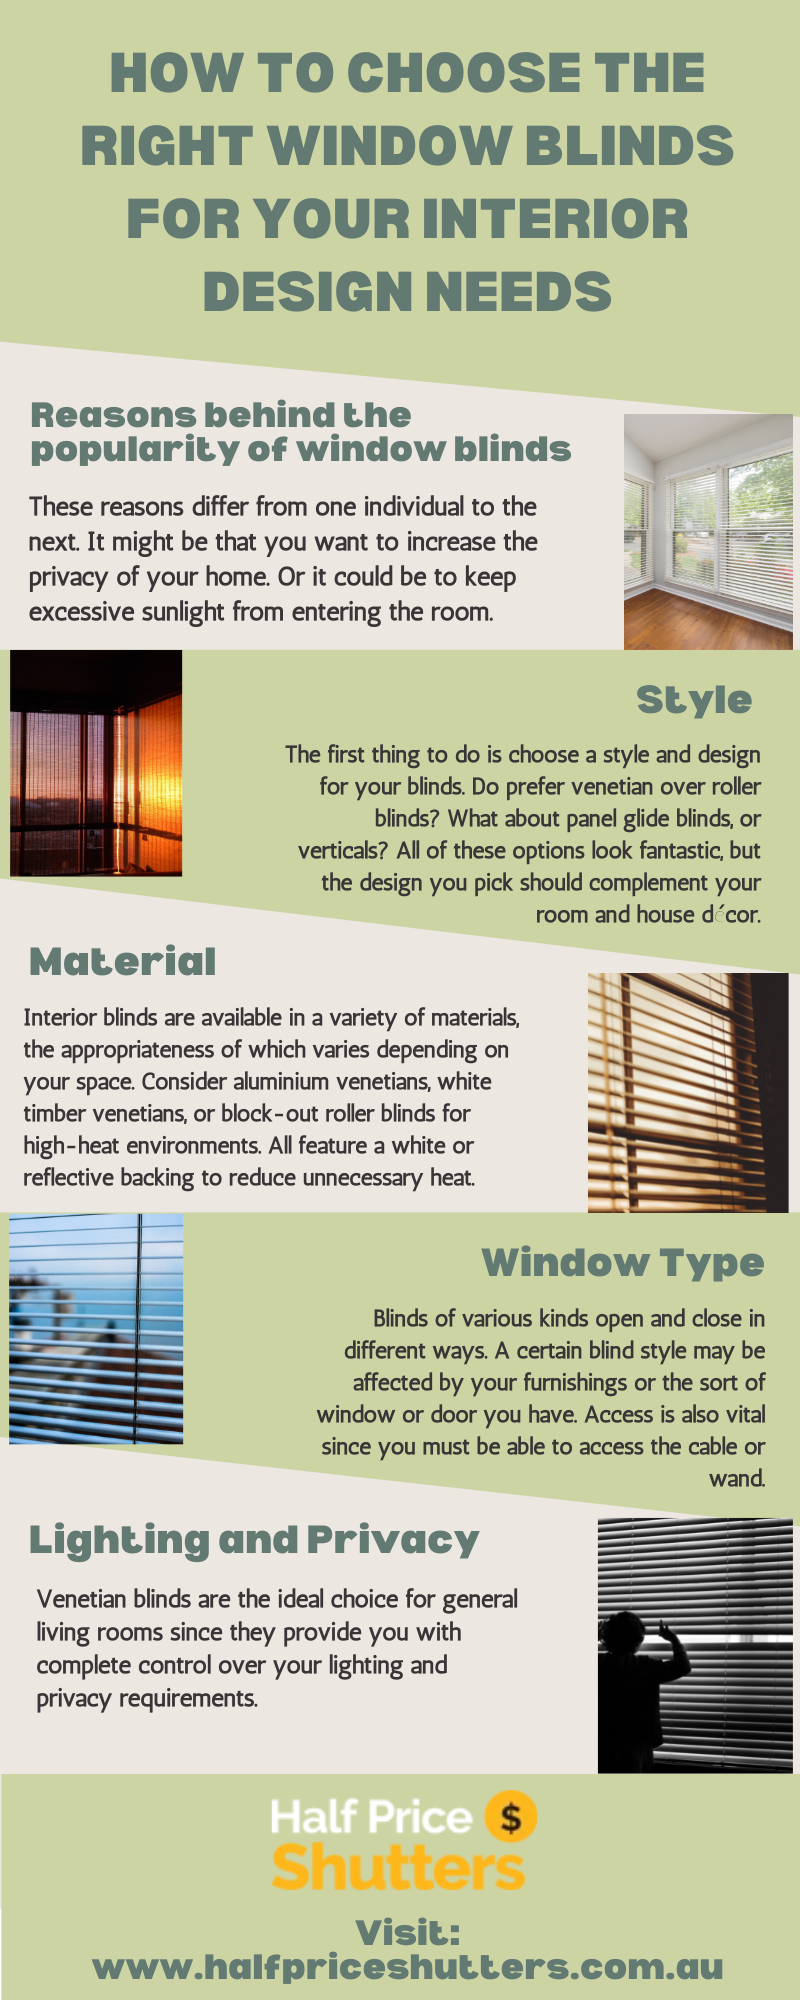 How to choose the right window blinds for your interior design needs